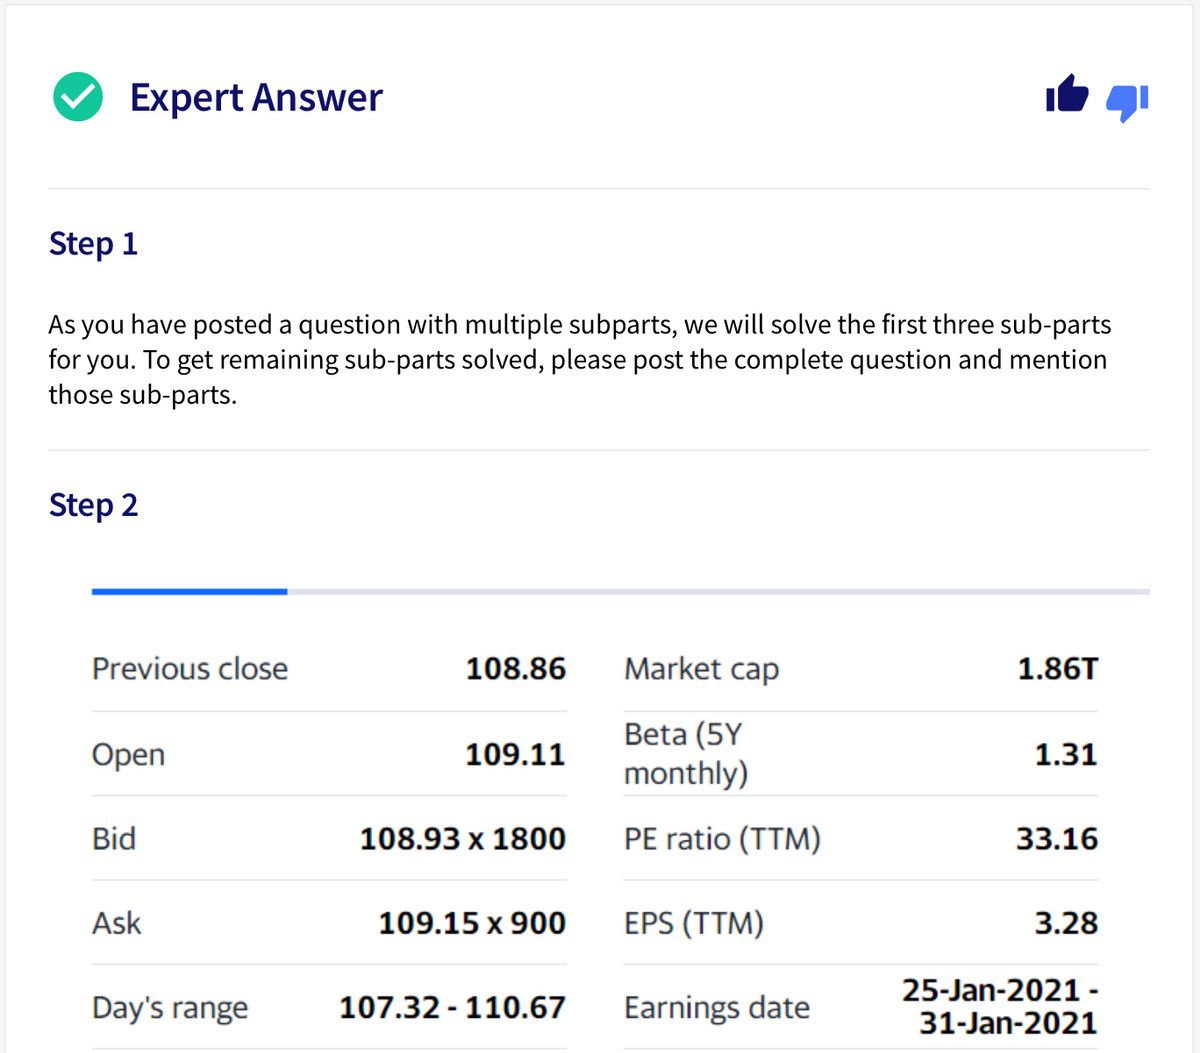 Expert Answer
Step 1
As you have posted a question with multiple subparts, we will solve the first three sub-parts
for you. To get remaining sub-parts solved, please post the complete question and mention
those sub-parts.
Step 2
Previous close
108.86
Market cap
1.86T
Beta (5Y
monthly)
Open
109.11
1.31
Bid
108.93 x 1800
PE ratio (TTM)
33.16
Ask
109.15 x 900
EPS (TTM)
3.28
25-Jan-2021 -
Day's range
107.32 - 110.67
Earnings date
31-Jan-2021
